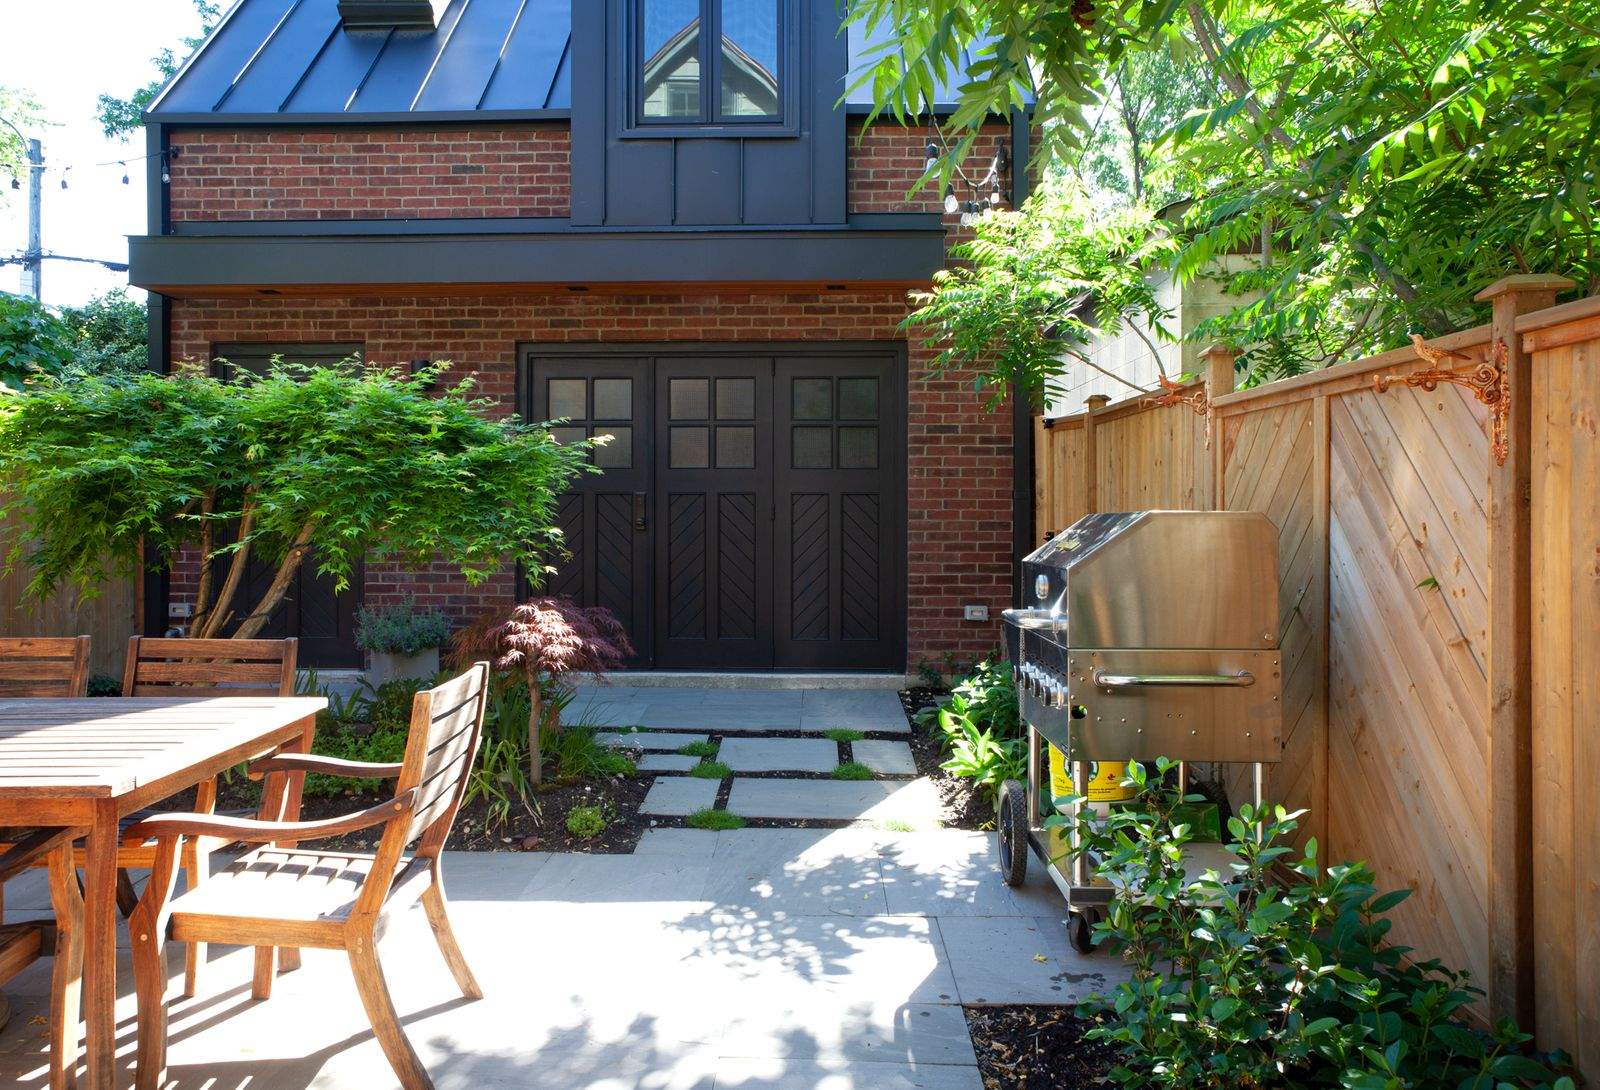 Backyard of traditional brick laneway house with outdoor living space